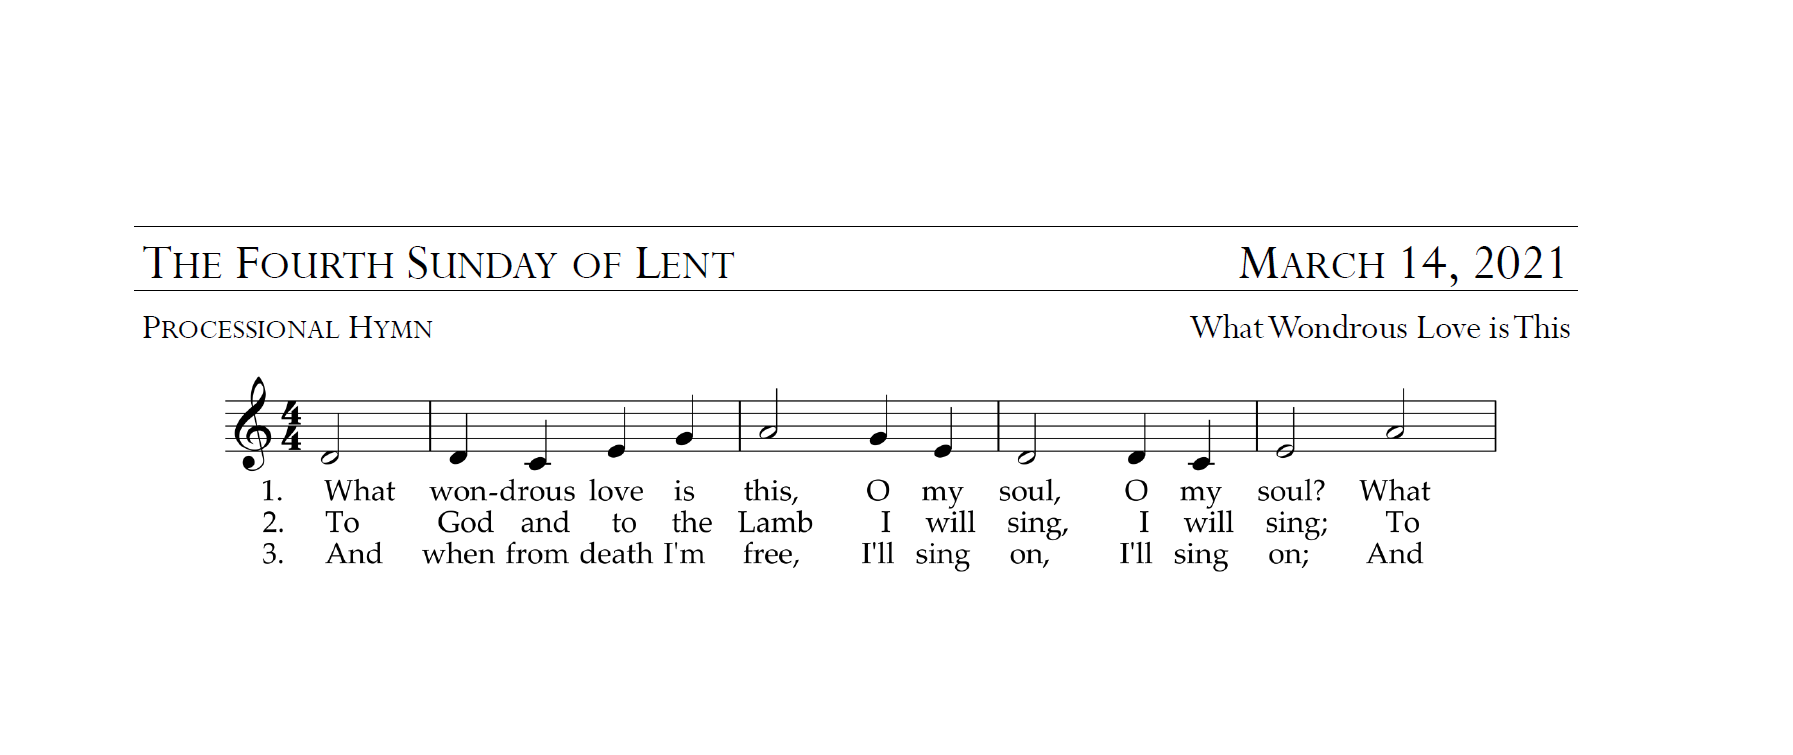 Worship Aid for March 14, 2021 - The Fourth Sunday of Lent